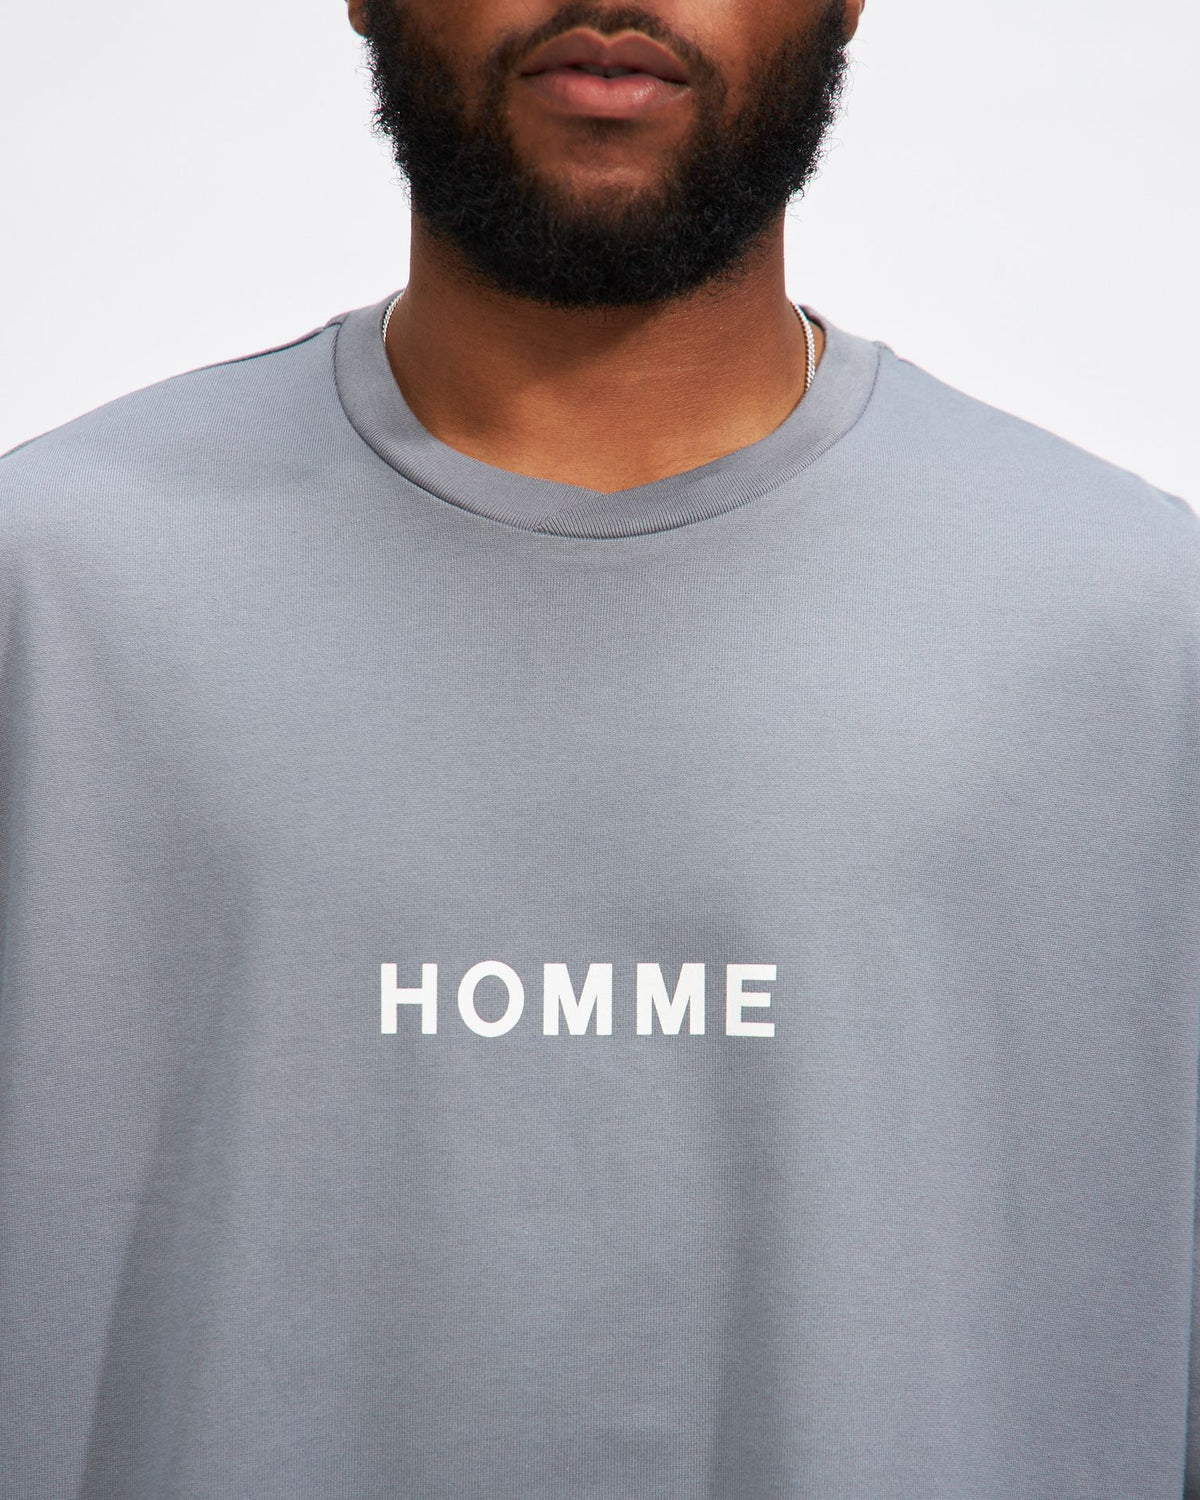 Homme T-Shirt in Grey